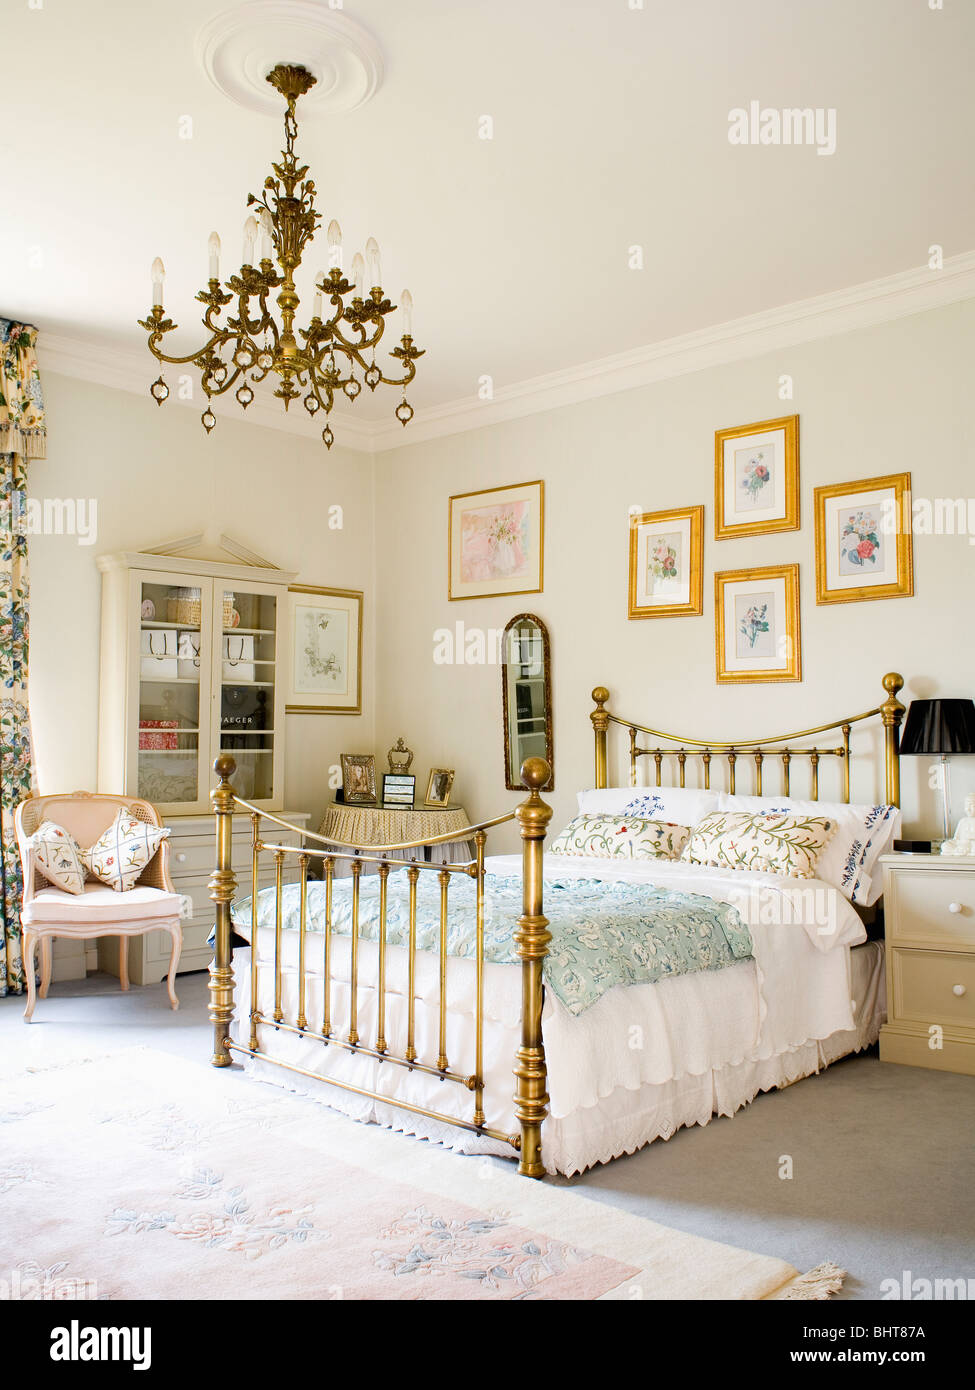 https://c8.alamy.com/comp/BHT87A/brass-chandelier-and-antique-brass-bed-in-traditional-bedroom-BHT87A.jpg